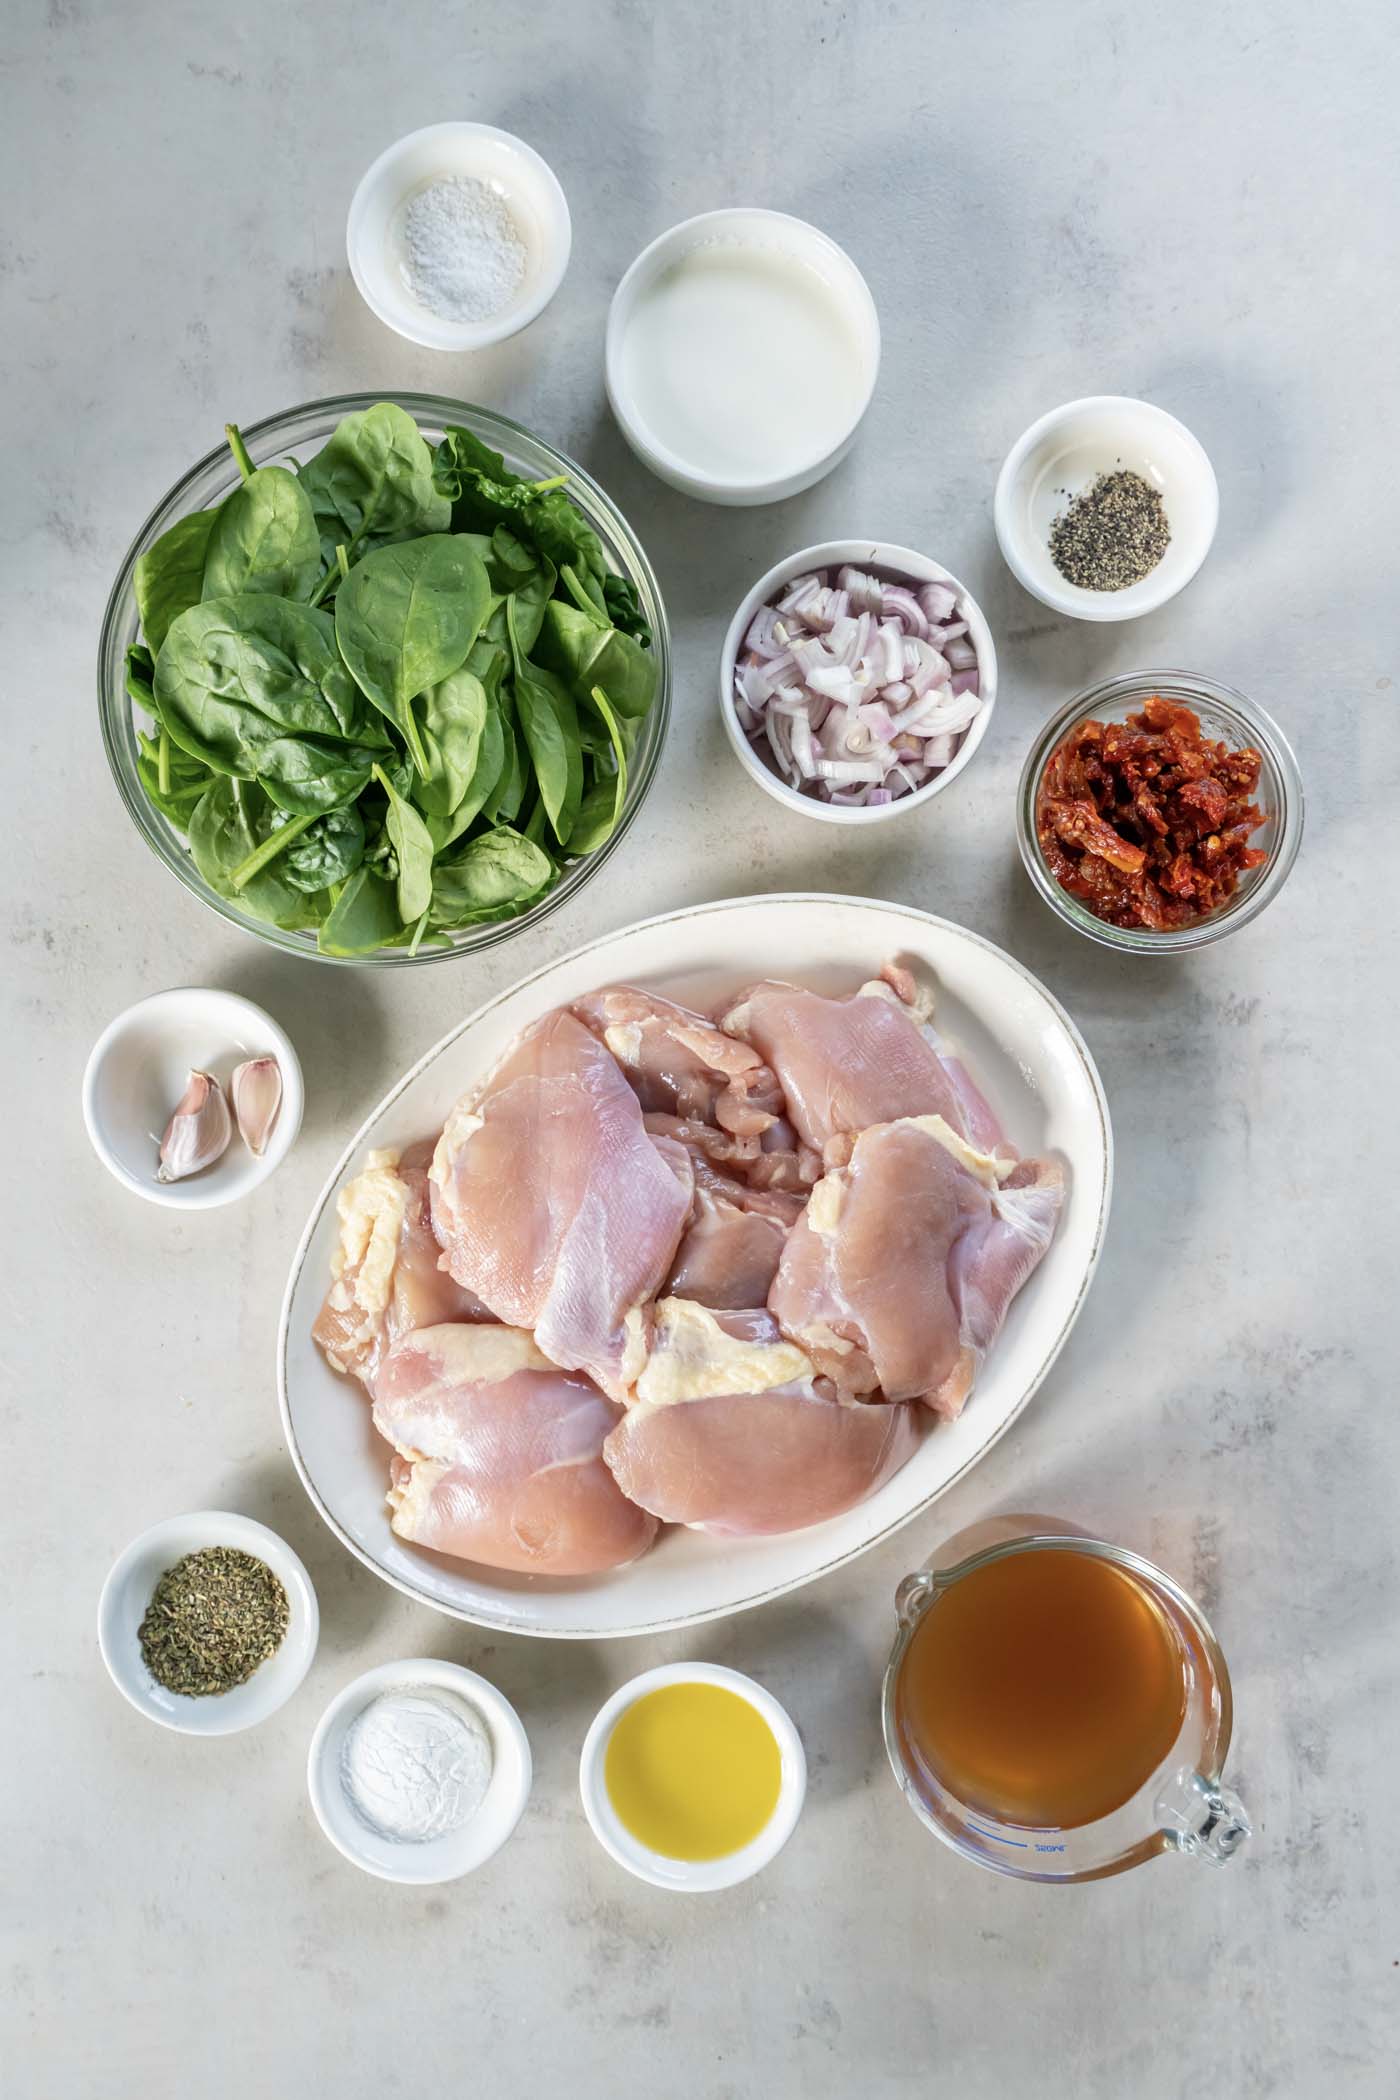 Ingredients for slow cooker chicken thighs recipe.